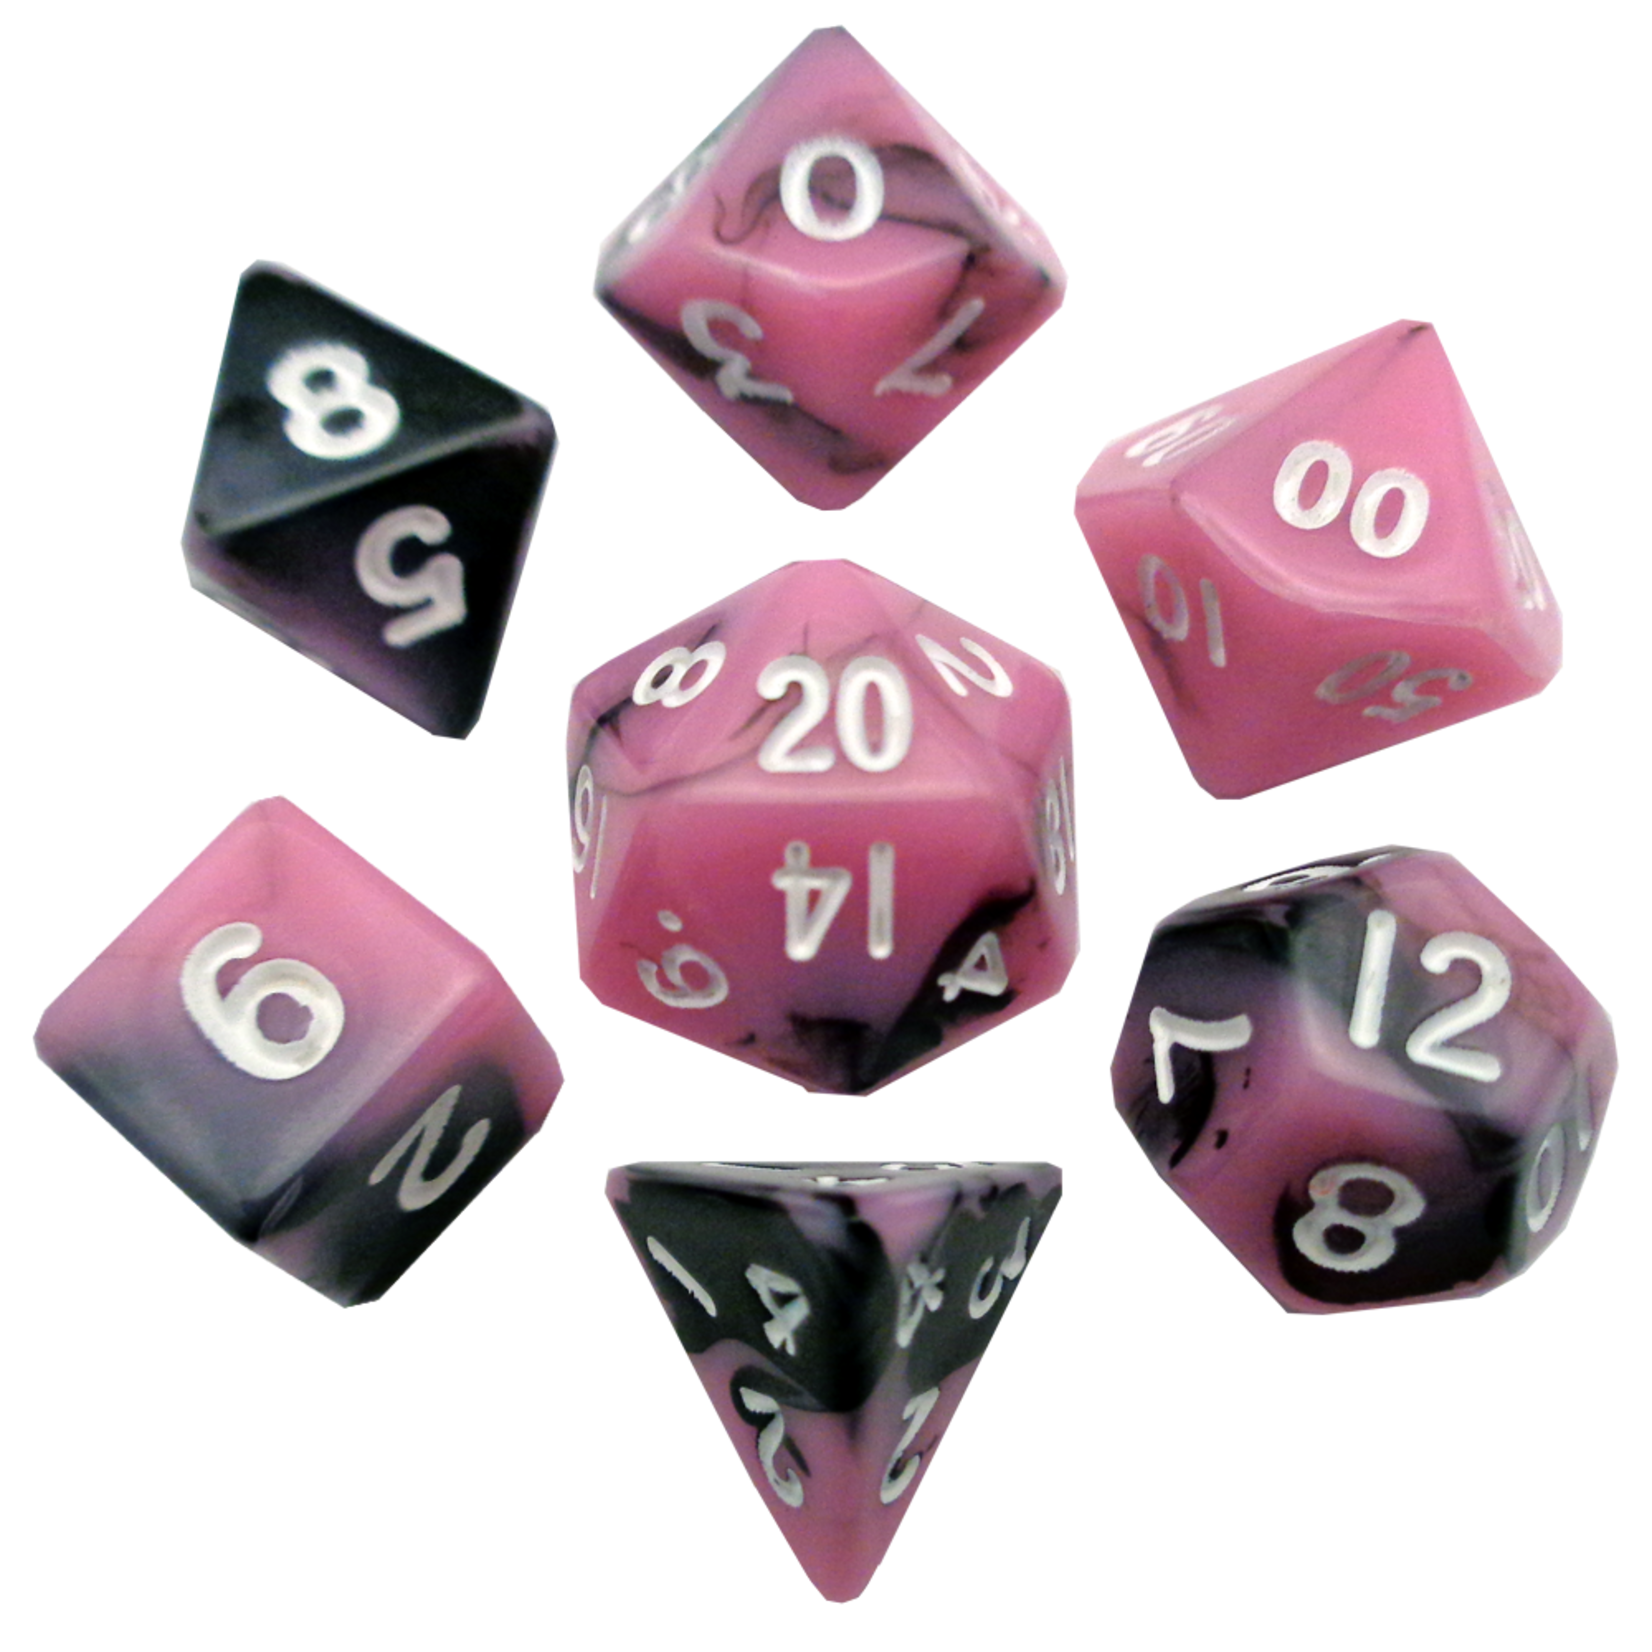 Metallic Dice Games 7-Piece Dice Set: Pink & Black with White Numbers (10mm)